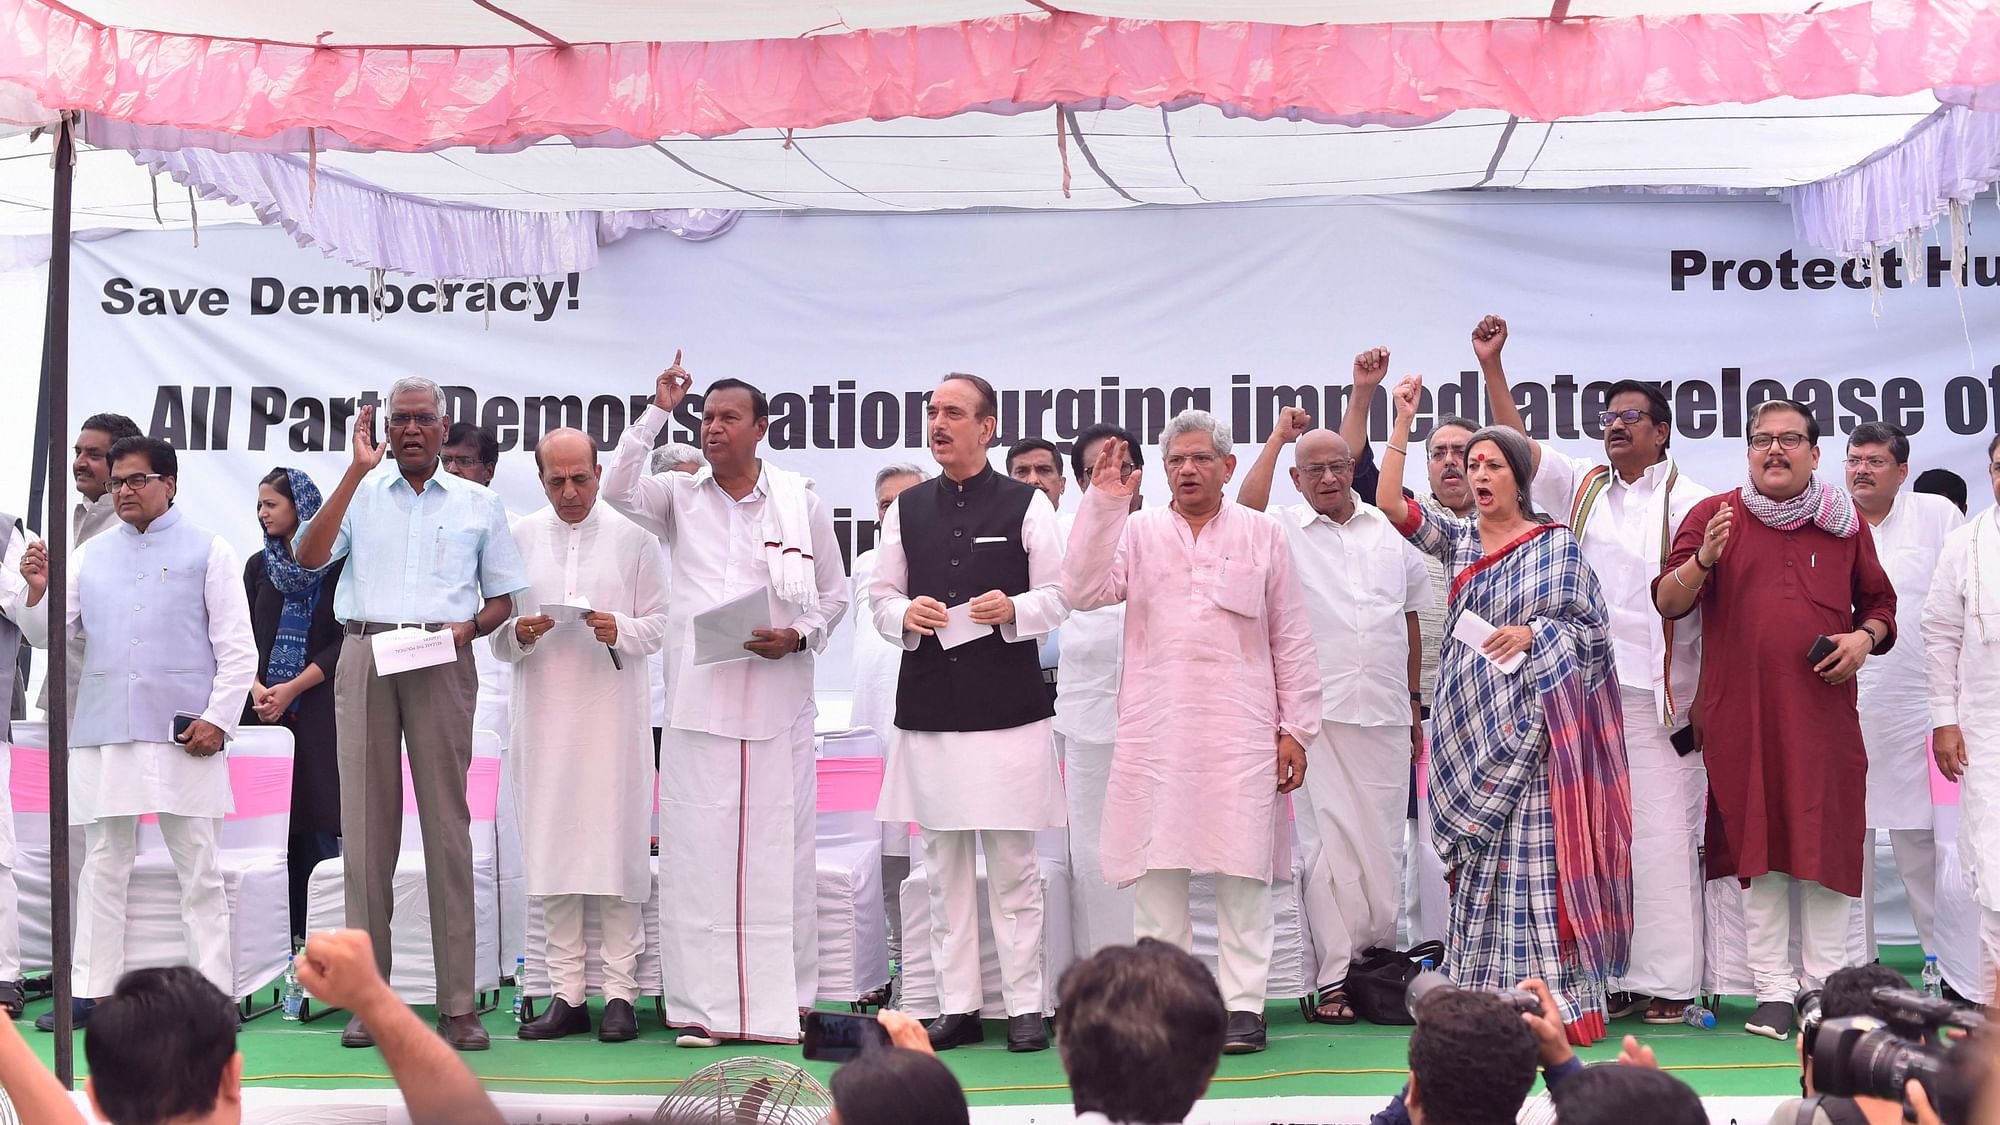 Opposition parties protest, demand release of leaders detained in J&amp;K, at Jantar Mantar in New Delhi on Thursday, 22 August